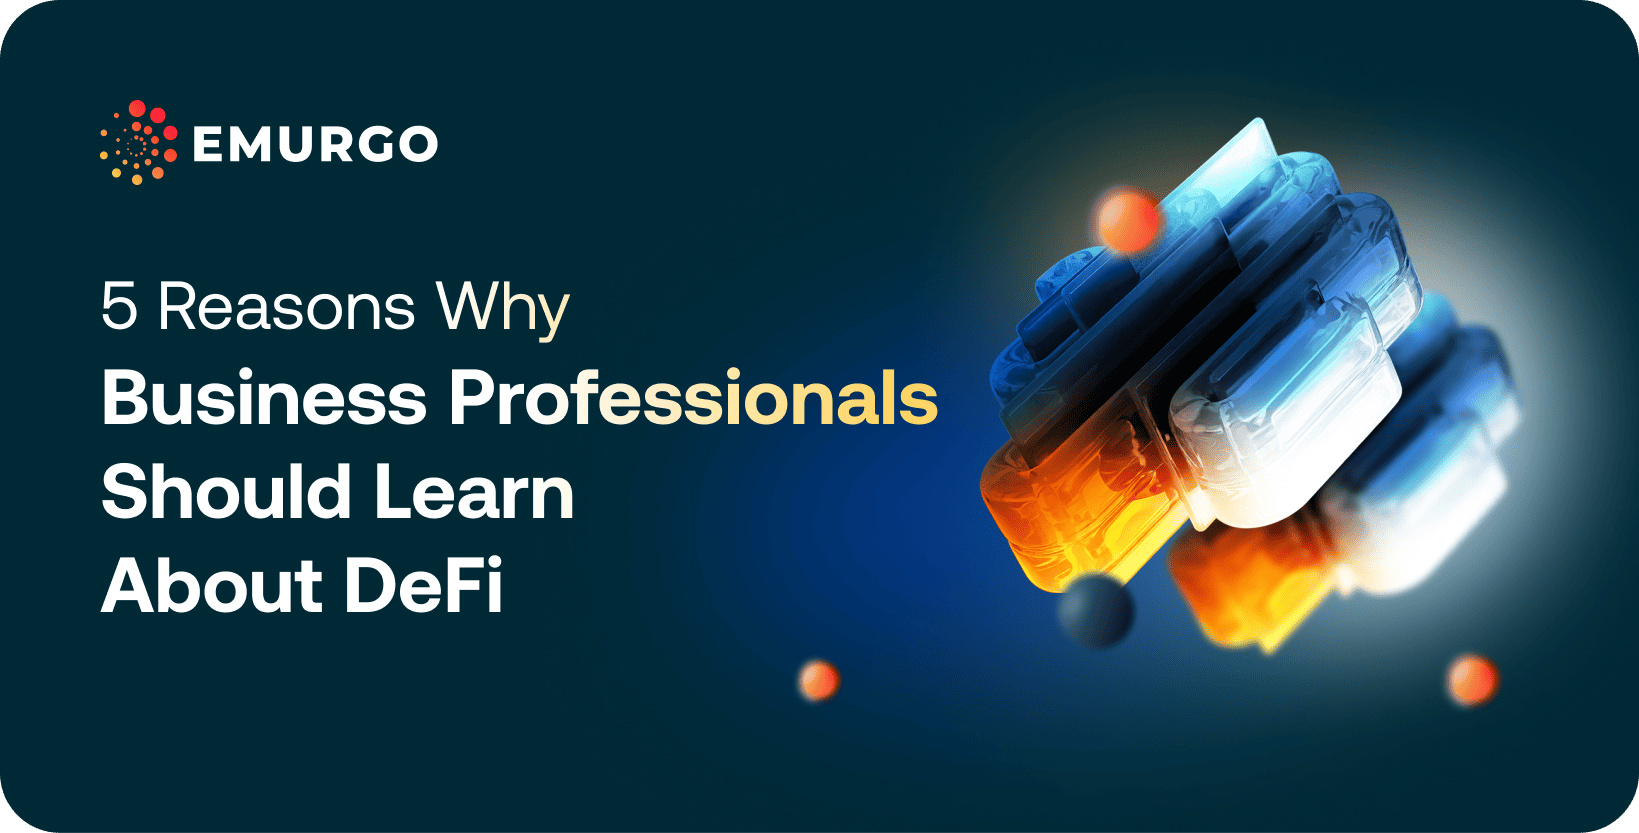 Blog 5 Reasons Why Business Professionals Should Learn About DeFi